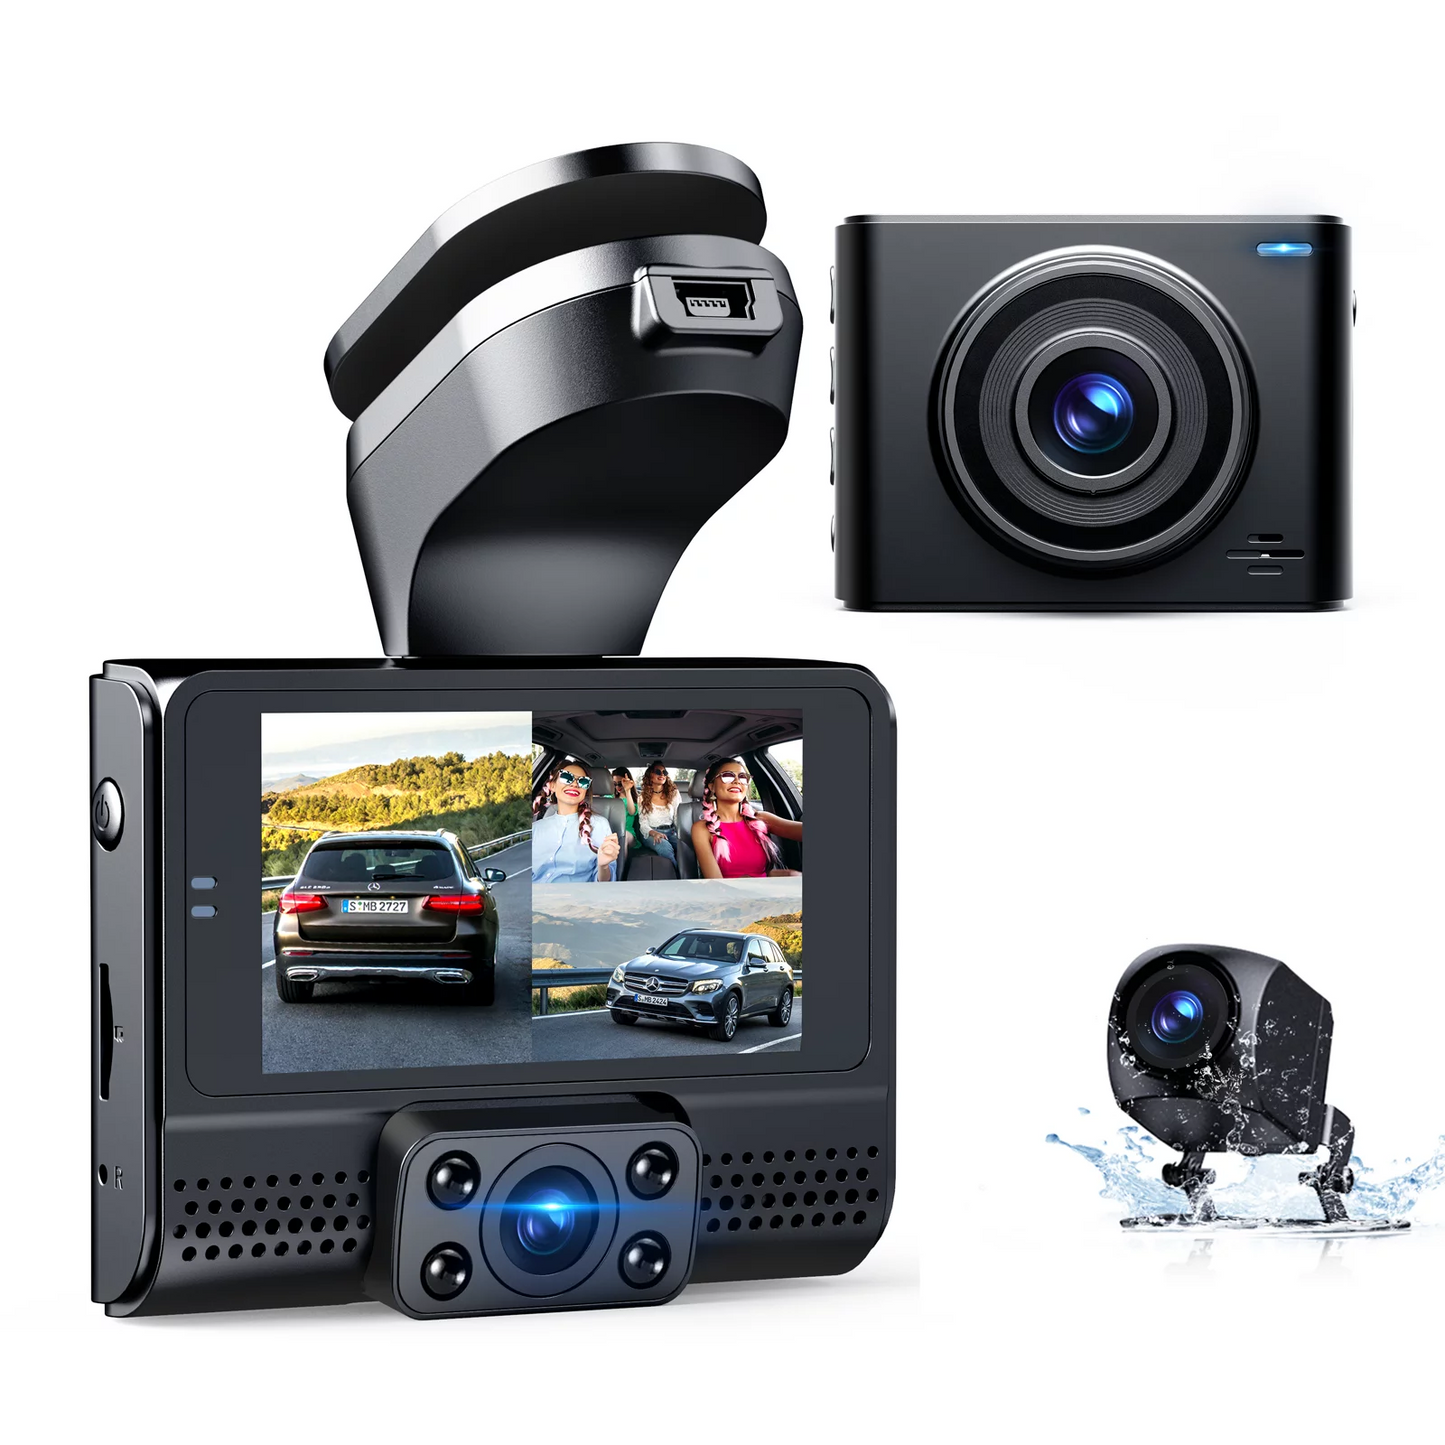 TOGUARD Dash Cam 3 Channel, 1080P GPS Dash Camera for Cars Three Way Triple Car Camera with IR Night Vision, Loop Recording, G-Sensor, Parking Monitor, 24 Hours Recording